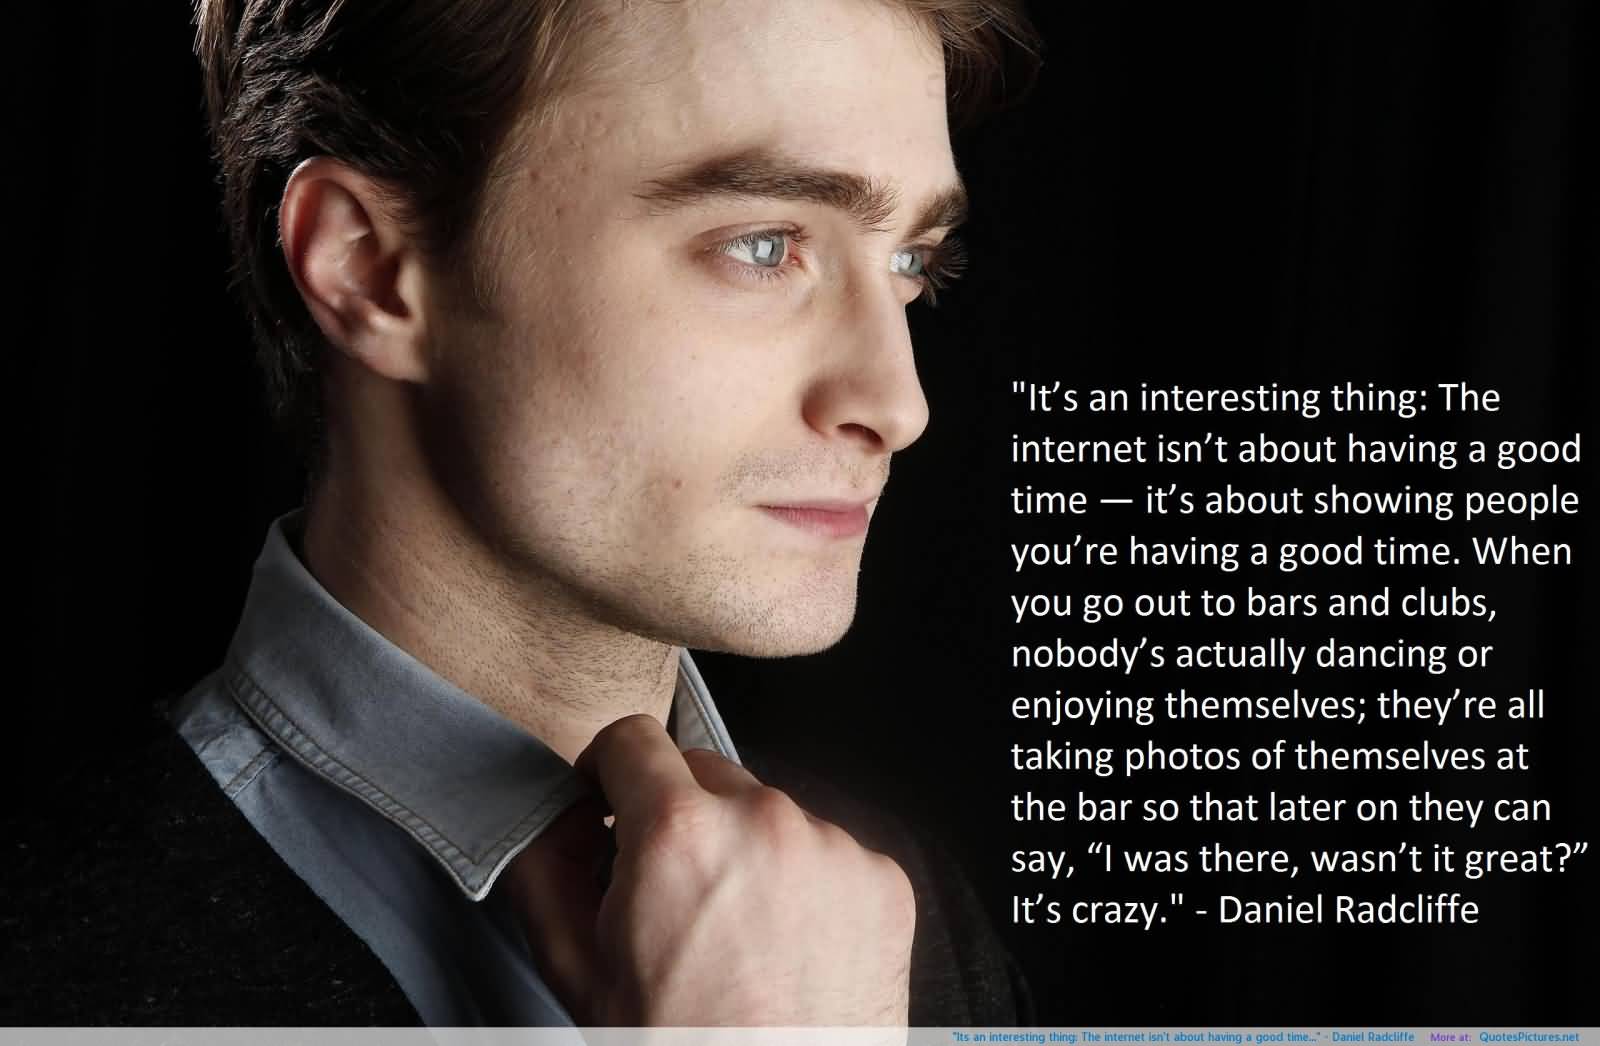 It’s an interesting thing; The internet isn’t about having a good time, it’s about showing people you’re having a good time. When you gout to bars and clubs,.. Daniel Radcliffe